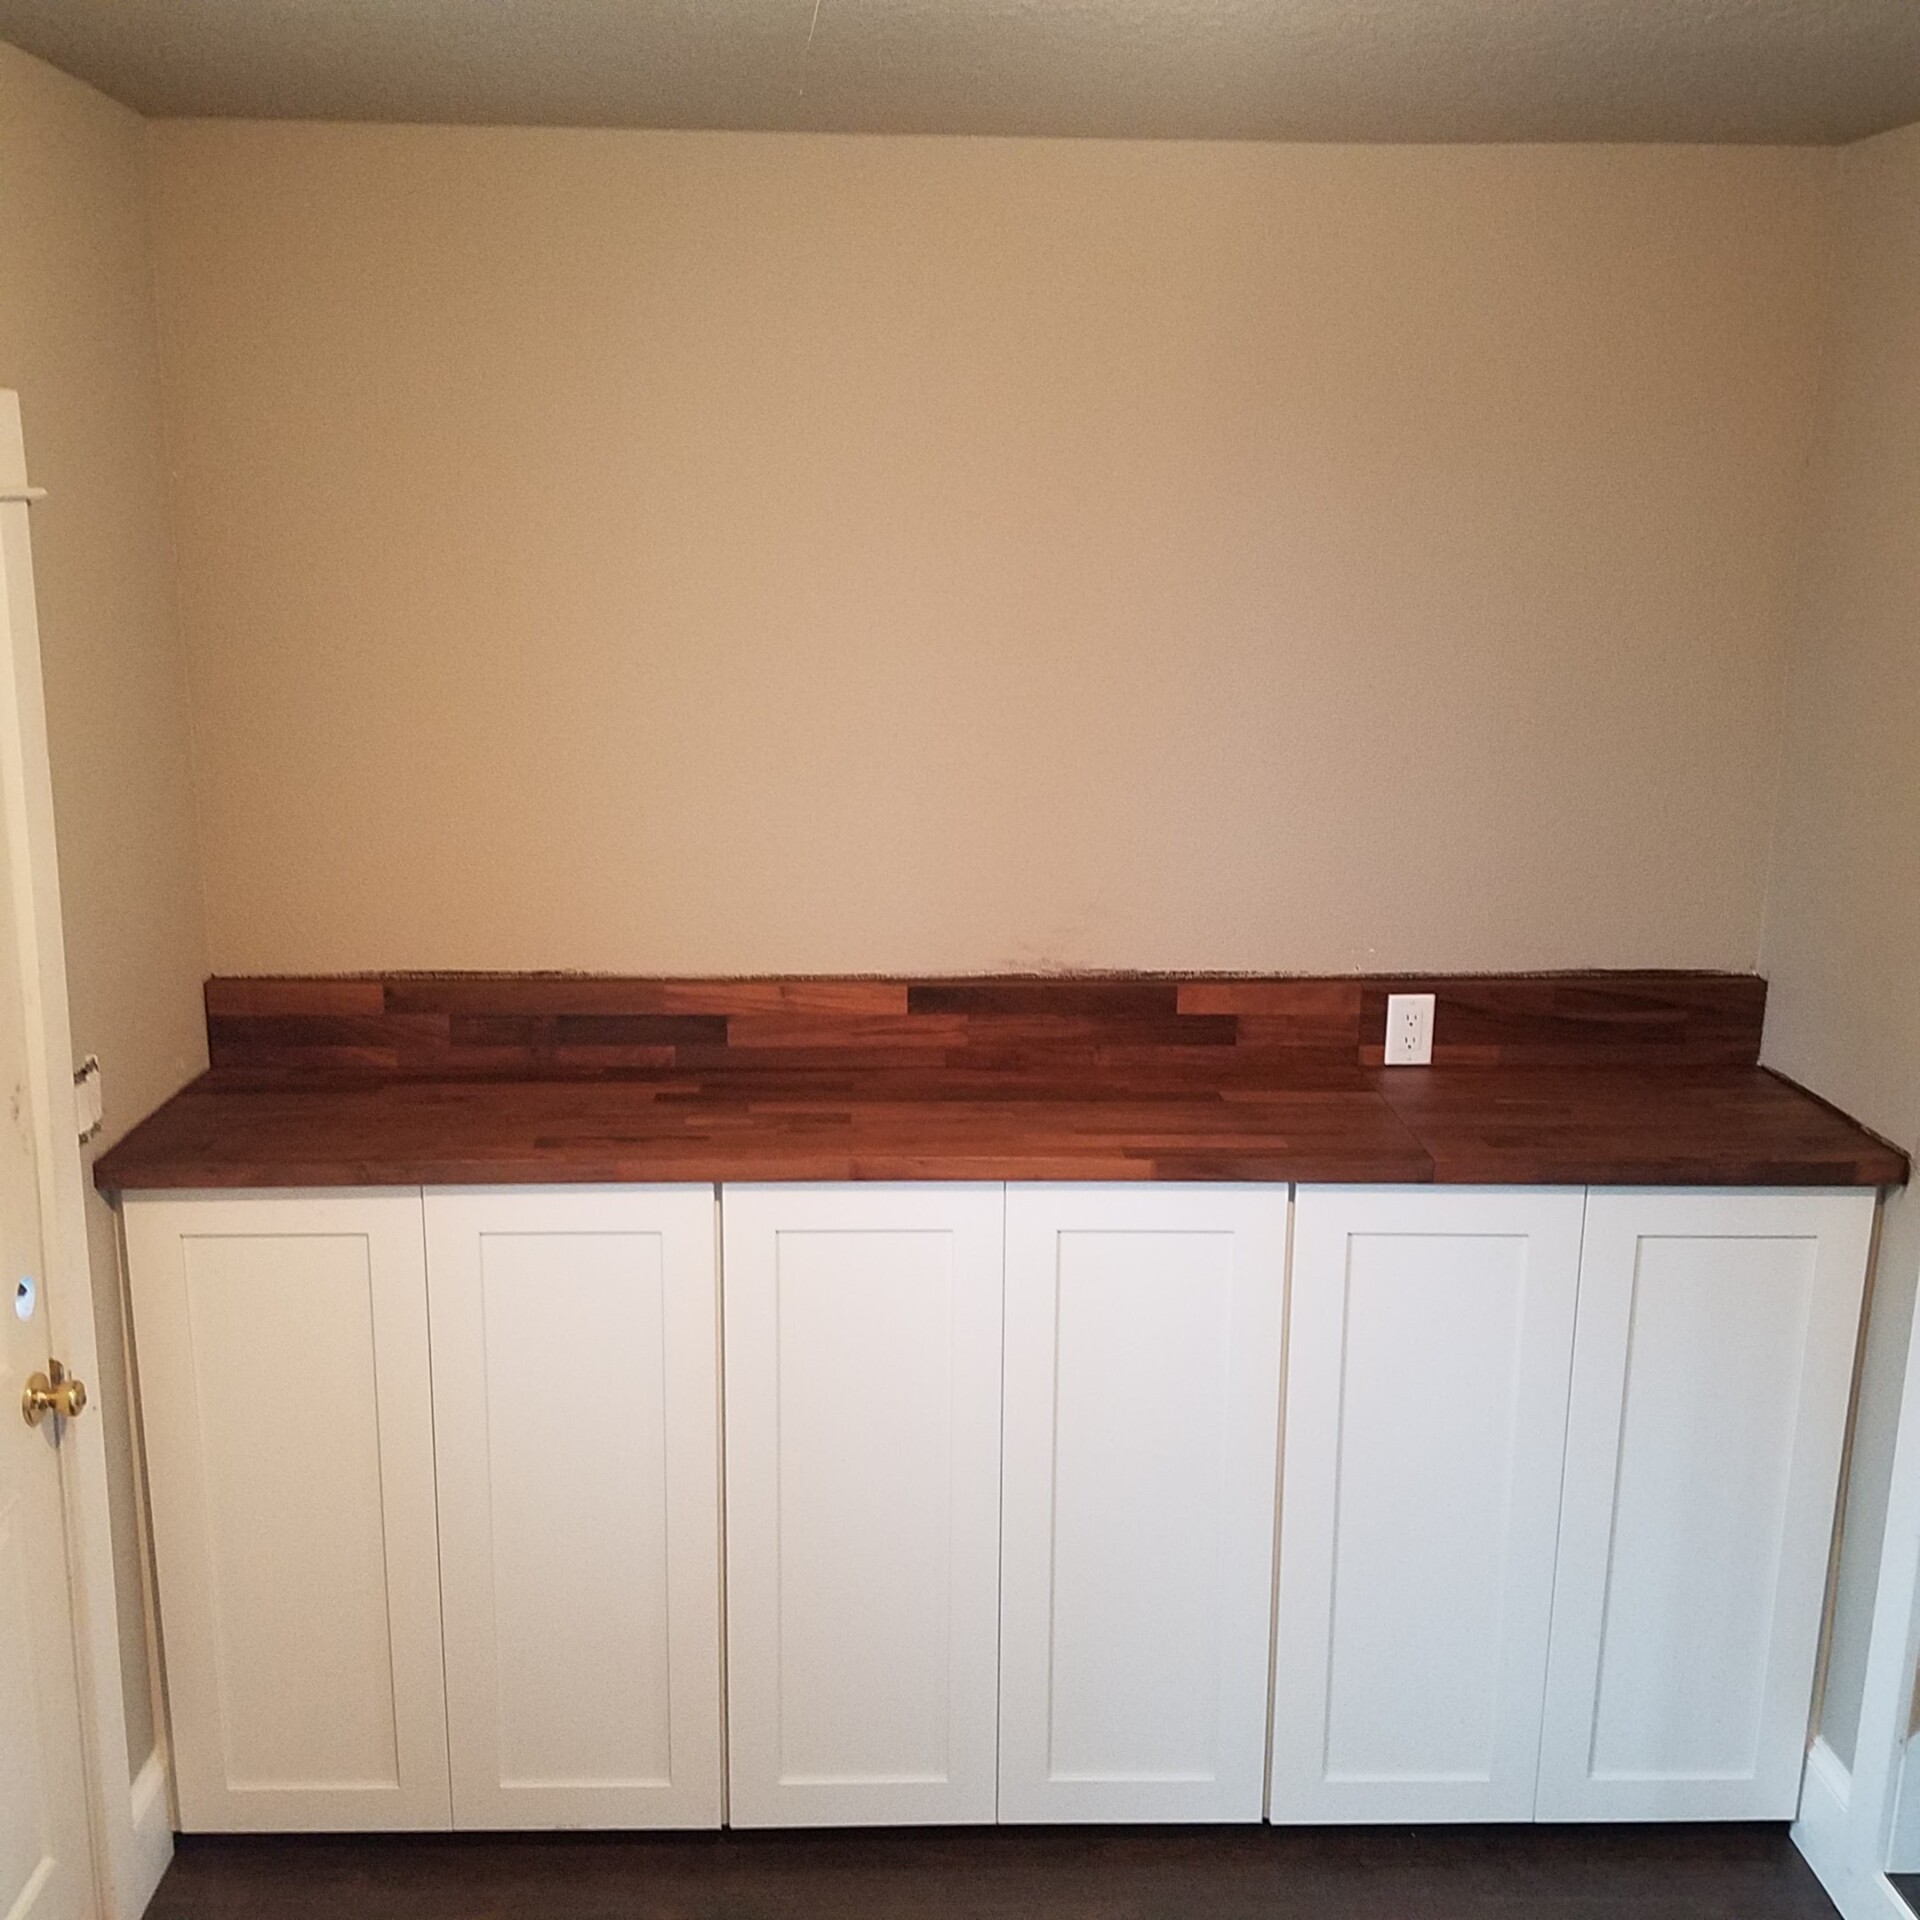 New Countertops and Cupboards